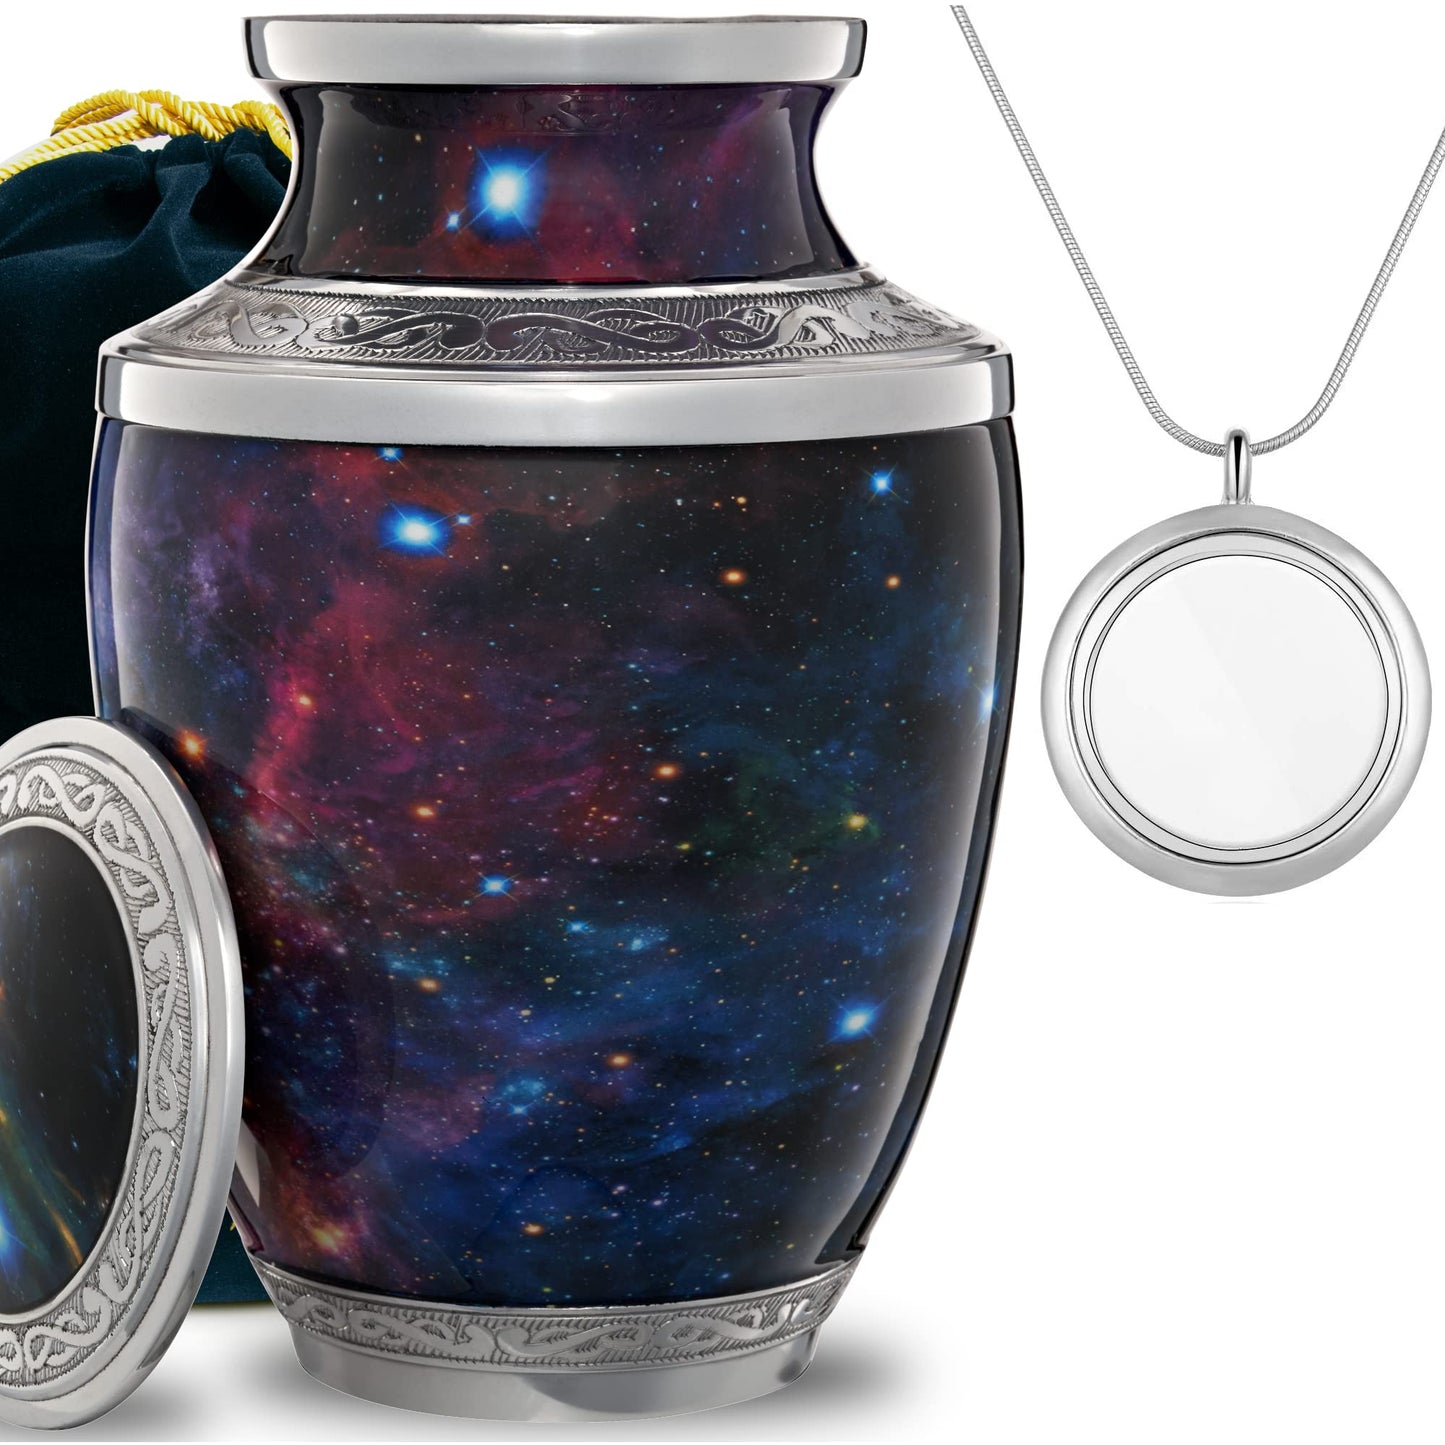 Olivia Memorials Galaxy Cremation Urn for Ashes Human Adult - Free Pendant Necklace - Stars Space Cosmic Funeral Decorative Urn for Women Men, Female Male, Carefully Handcrafted